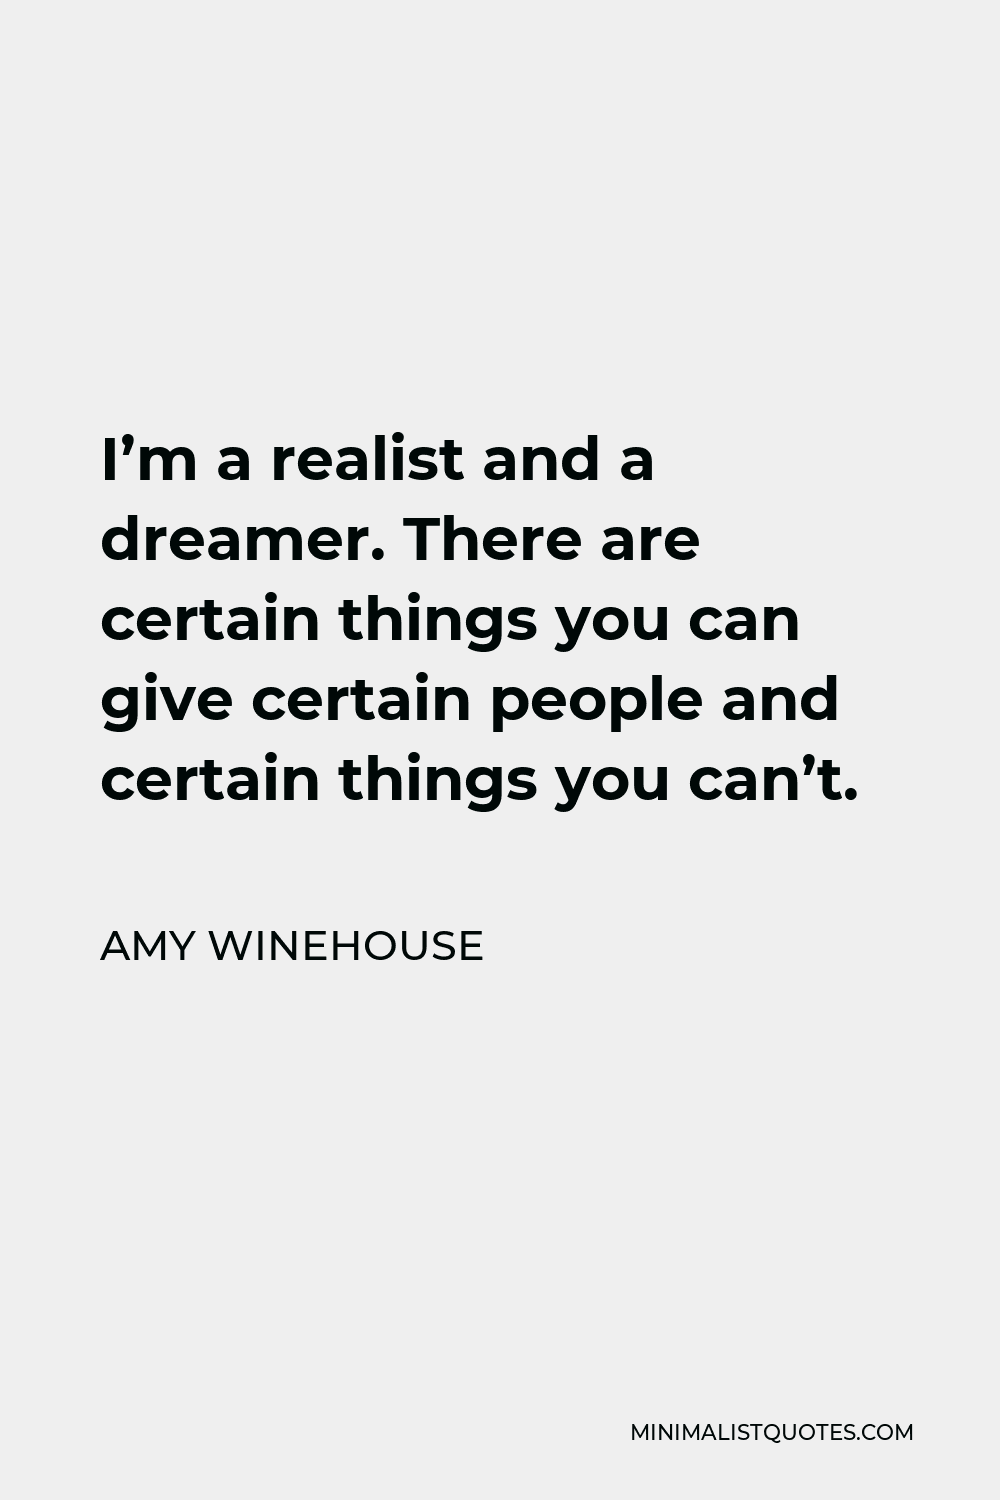 Amy Winehouse Quote - I’m a realist and a dreamer. There are certain things you can give certain people and certain things you can’t.